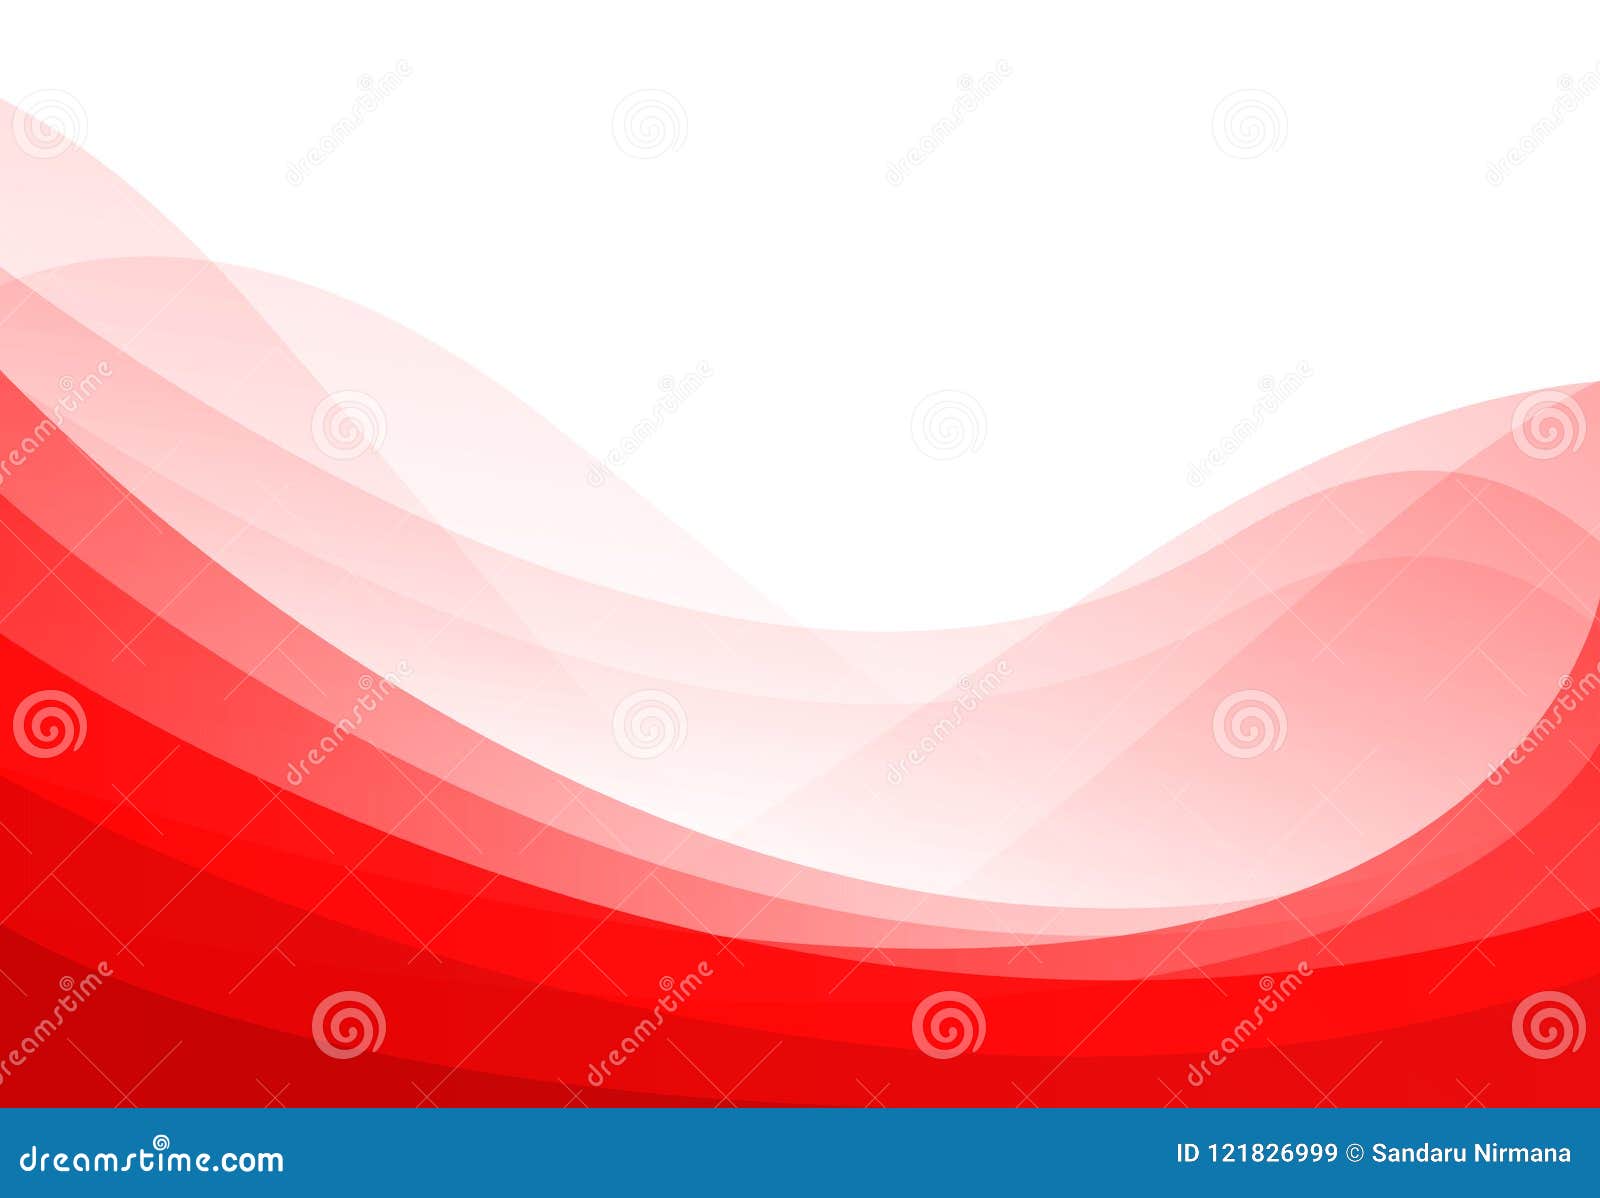 HD wallpaper white black and red wallpaper colorful abstract design  background  Wallpaper Flare